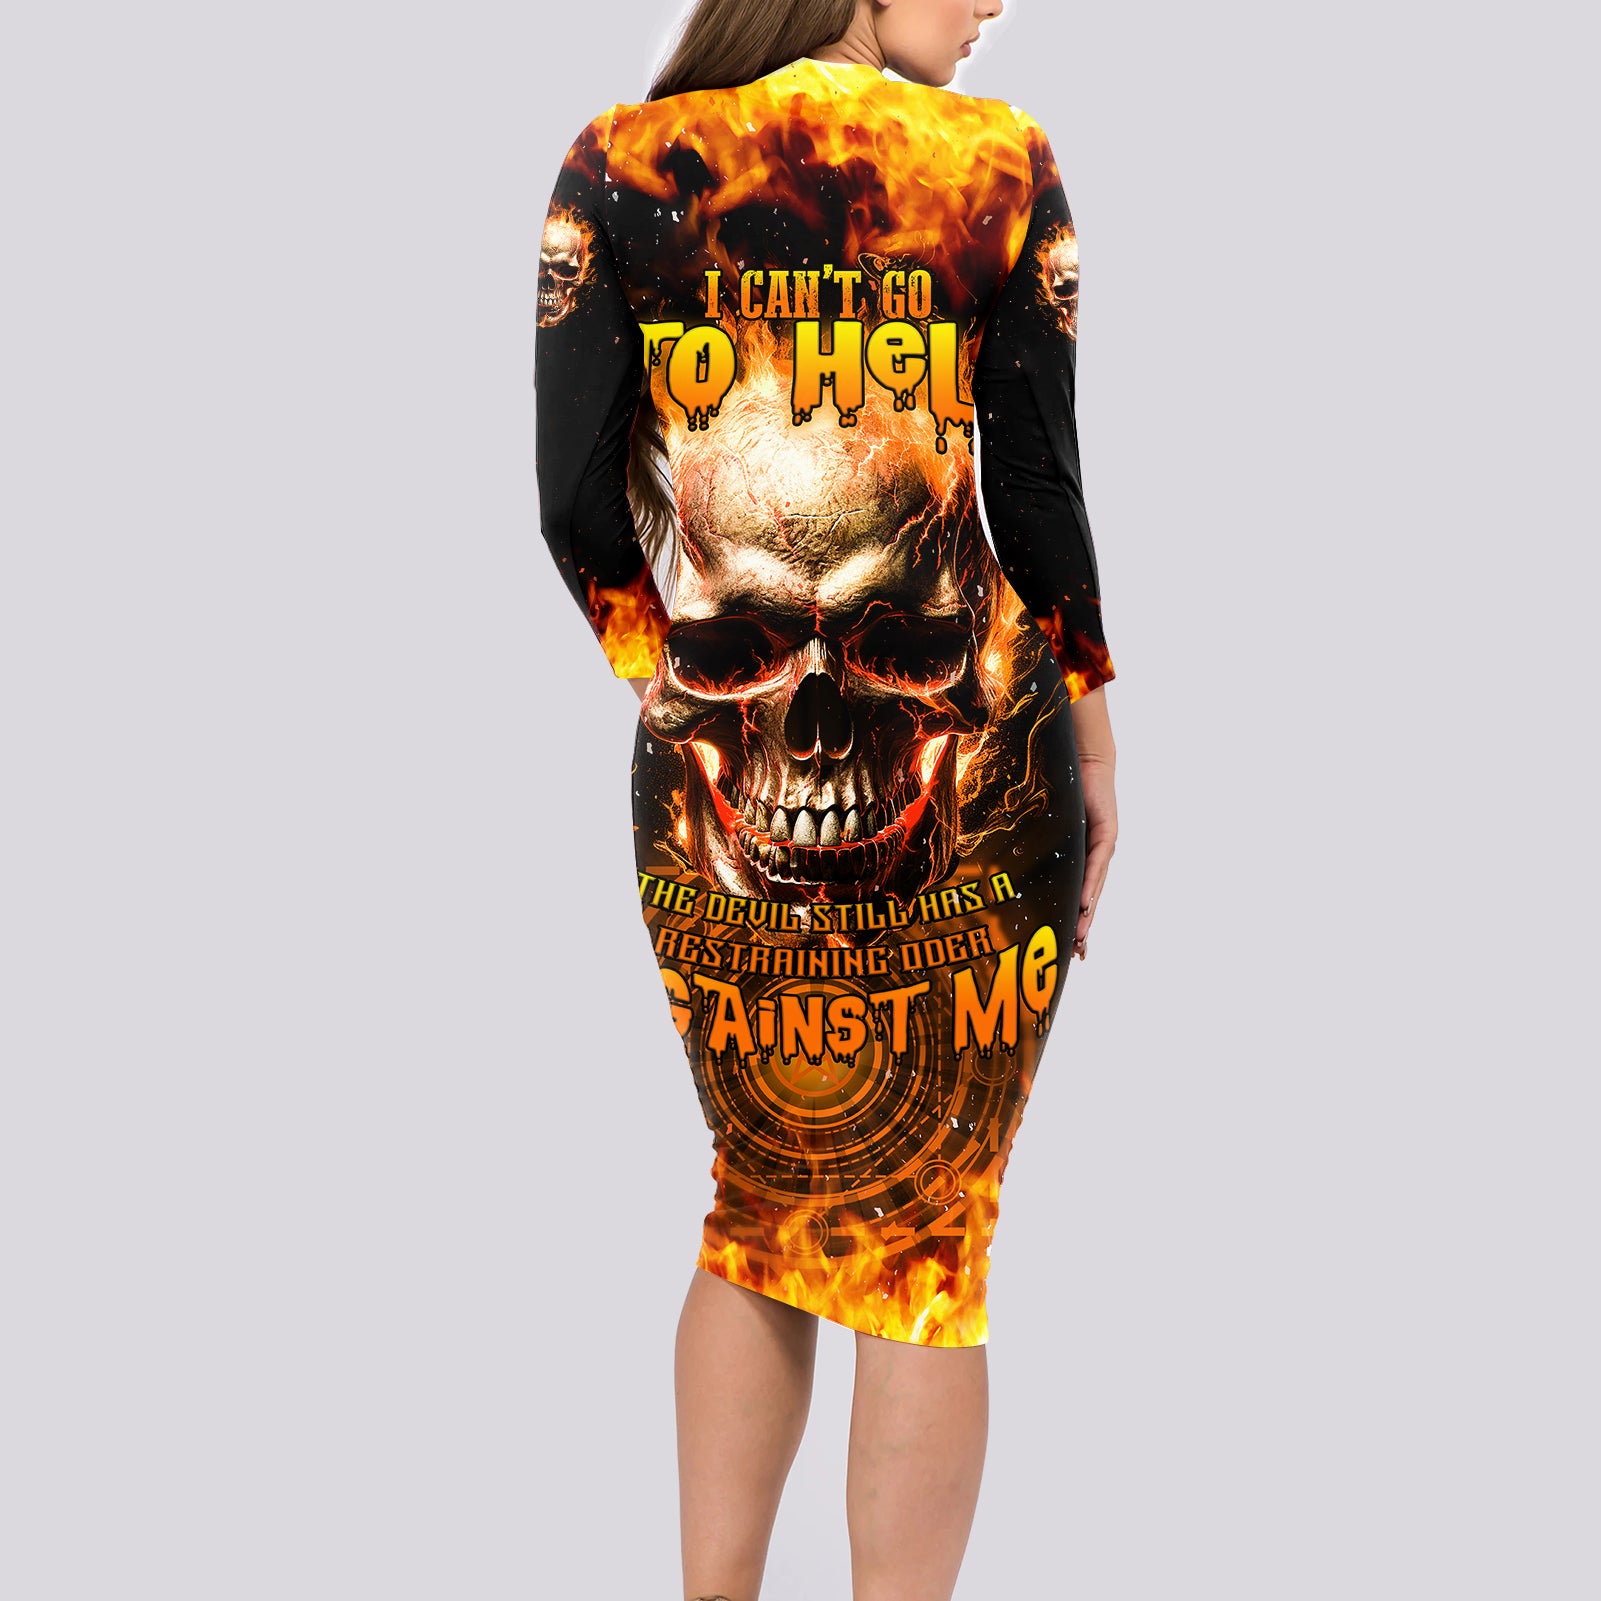 magic-fire-skull-long-sleeve-bodycon-dress-i-cant-go-to-hell-the-devil-still-has-a-rest-training-oder-against-me